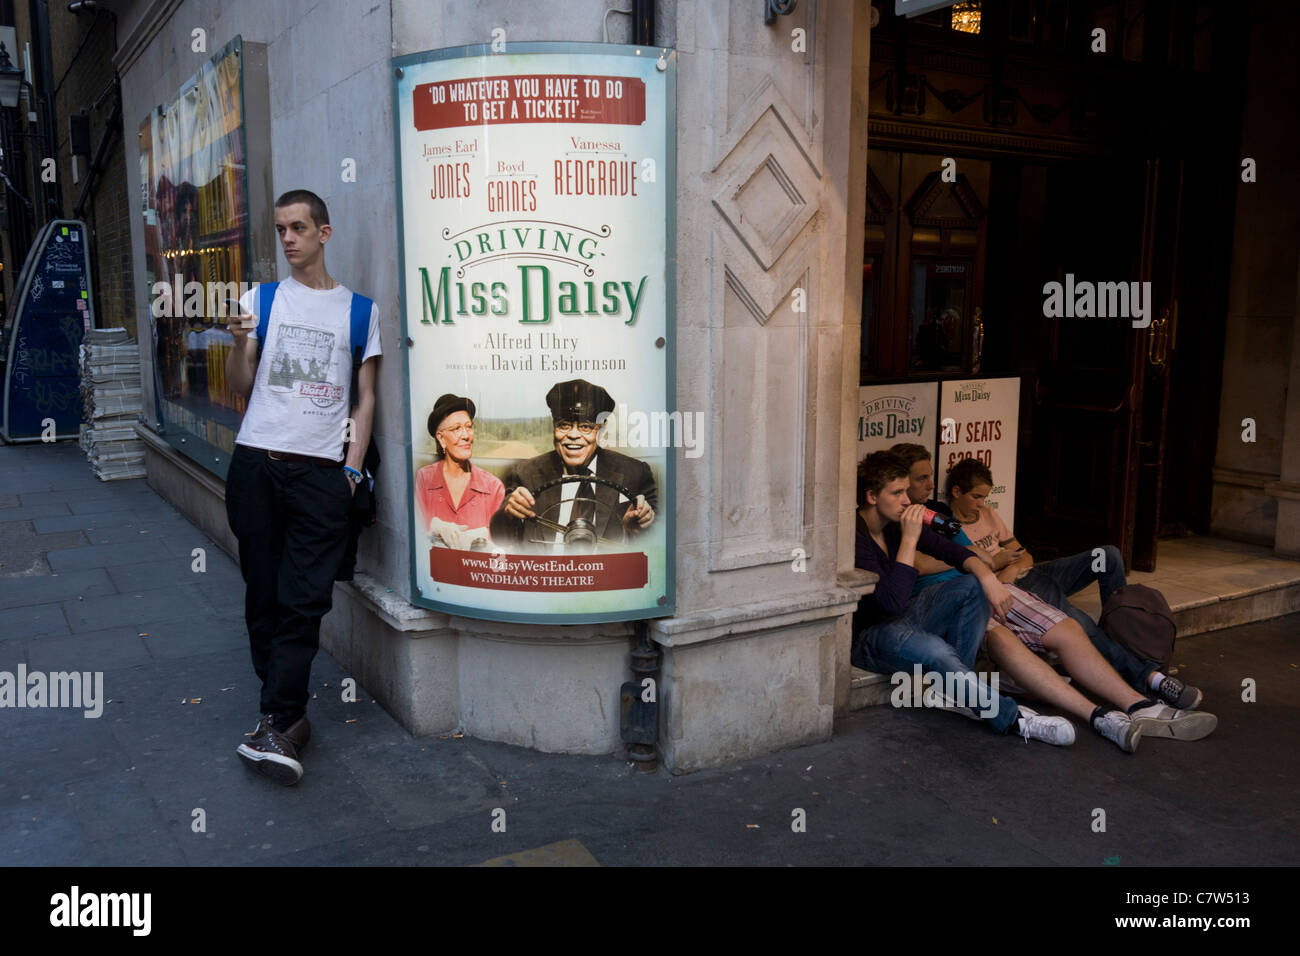 Youths hang around London's Wyndham's Theatre where the play 'Driving Miss Daisy' with Vanessa Redgrave is playing. Stock Photo